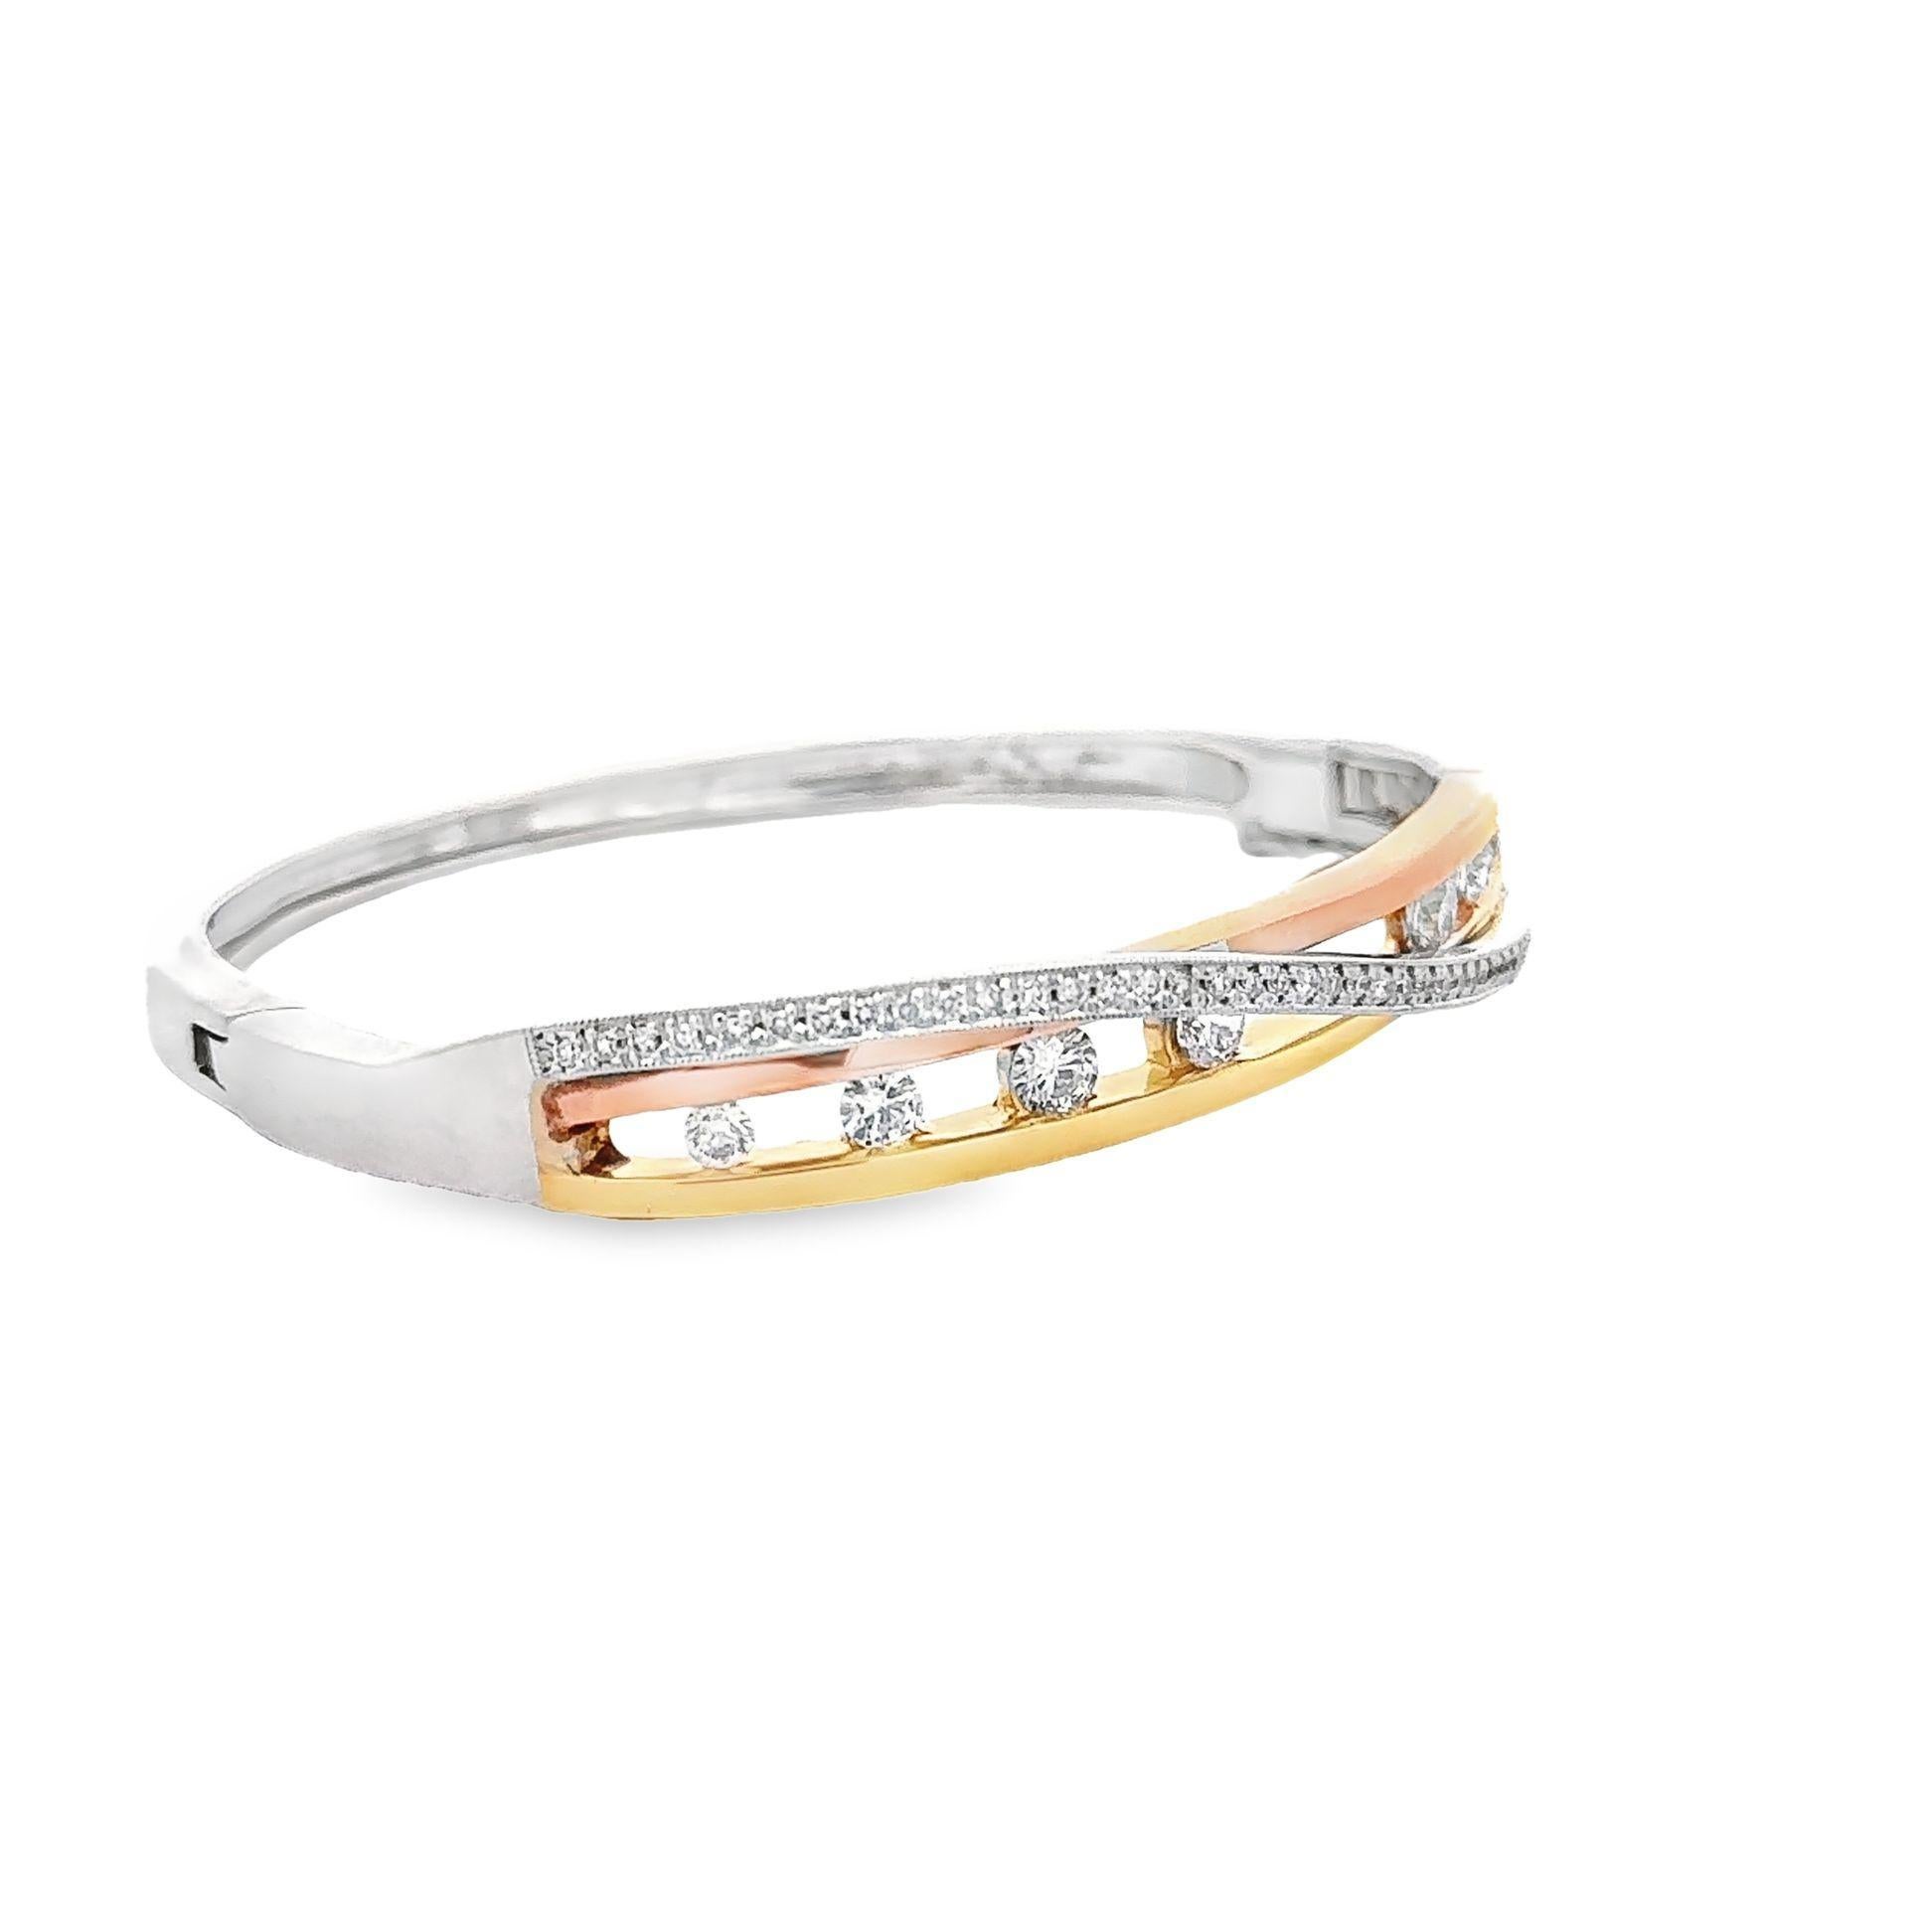 This three color gold & diamond bangle is a sweet addition to your daily outfit. The rigidness of the bracelet in yellow, white and pink gold features a smooth and polished elegance. Embraced by the parting and overlapping ribbons are pave-set